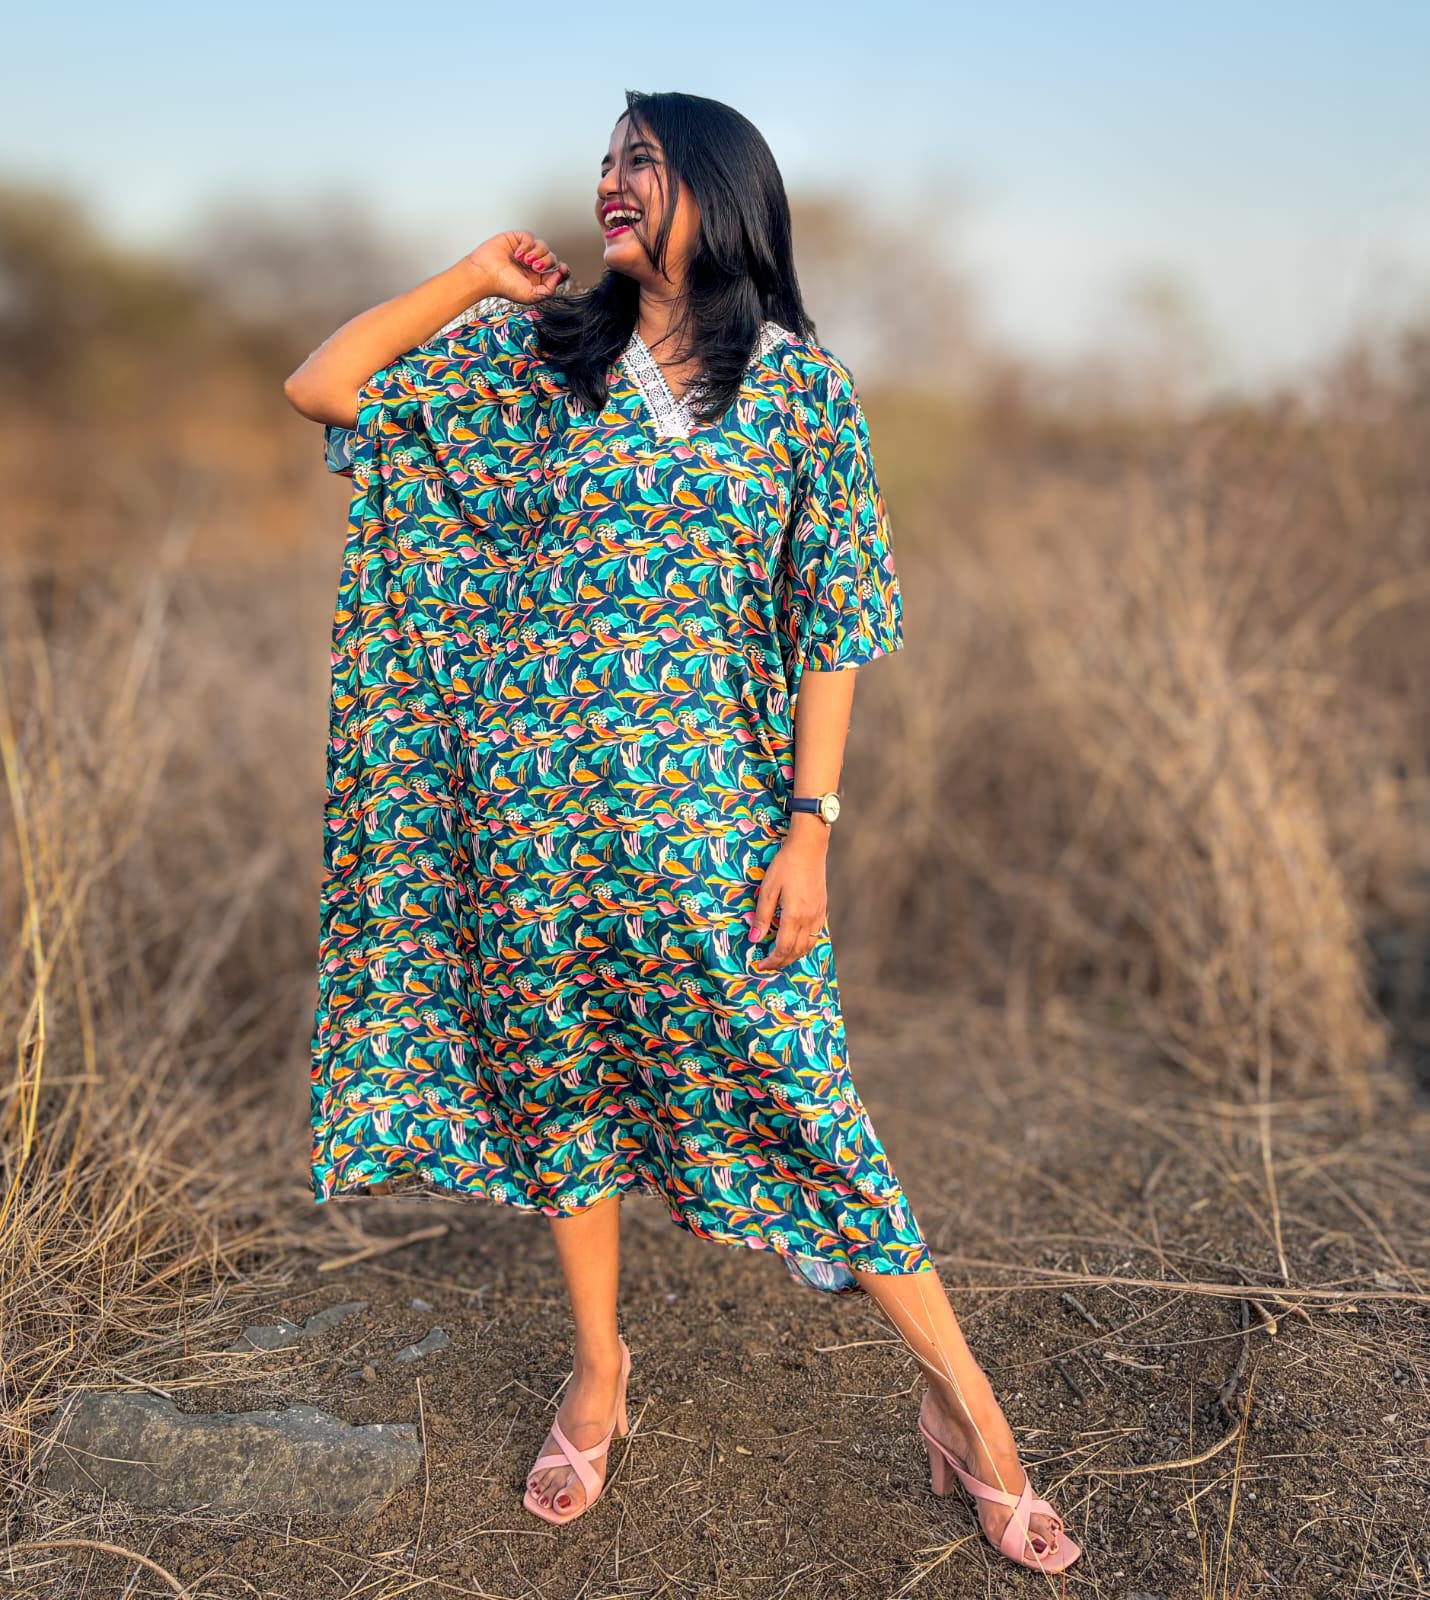  Crepe Kaftan Dress inspired by Water Hyacinth in tropical lagoons. Free-flowing and stylish, offering comfort and elegance. Perfect for all occasions with a unique vibrant floral print. #CrepeKaftan #TropicalFashion #WaterHyacinthPrint #SummerStyle